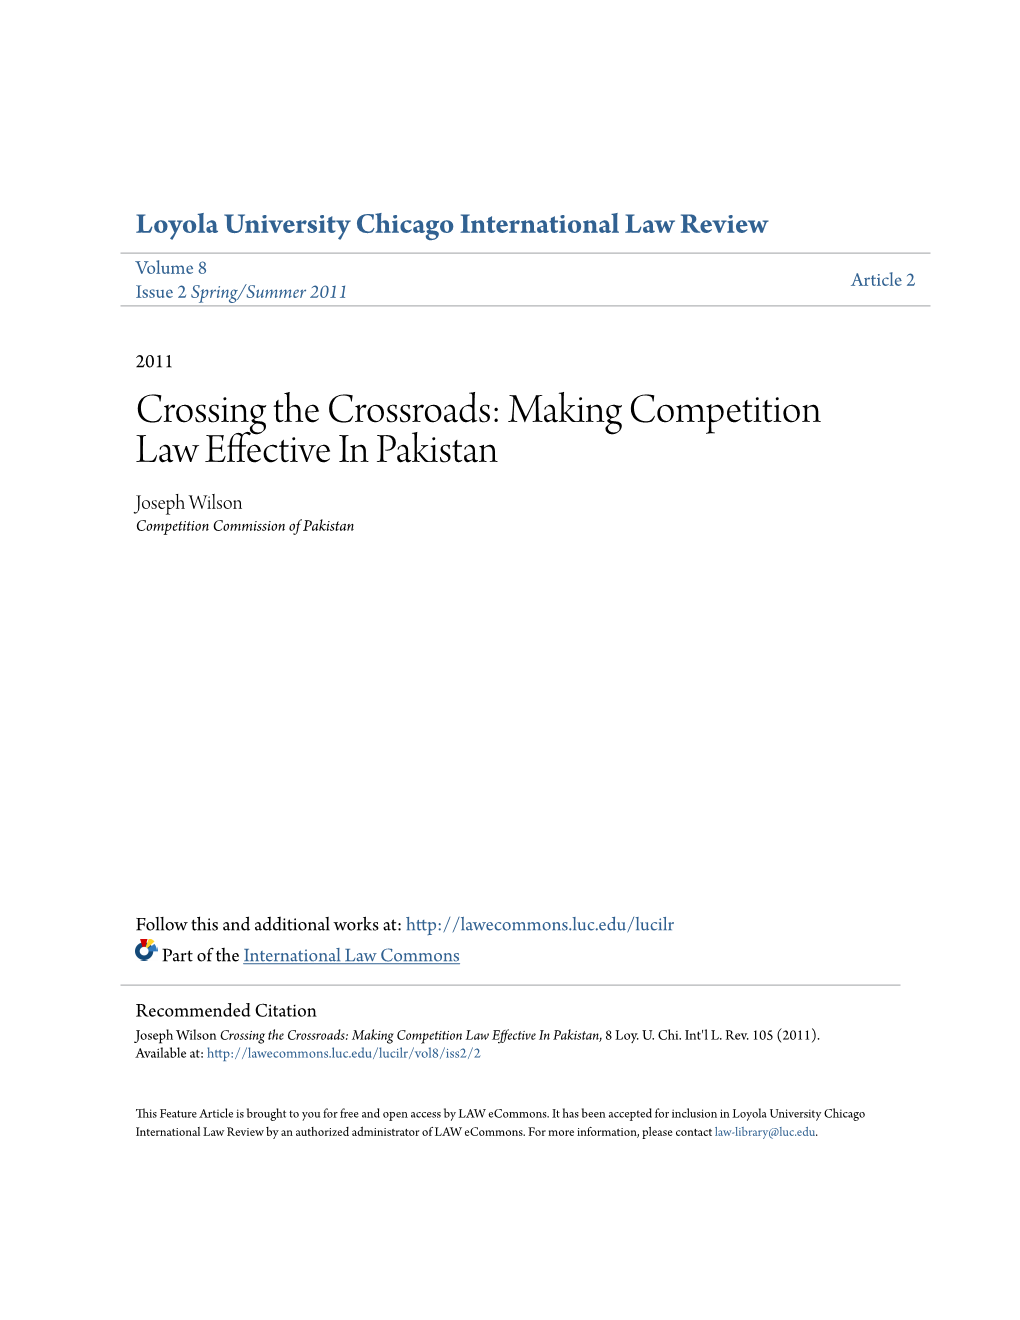 Making Competition Law Effective in Pakistan Joseph Wilson Competition Commission of Pakistan